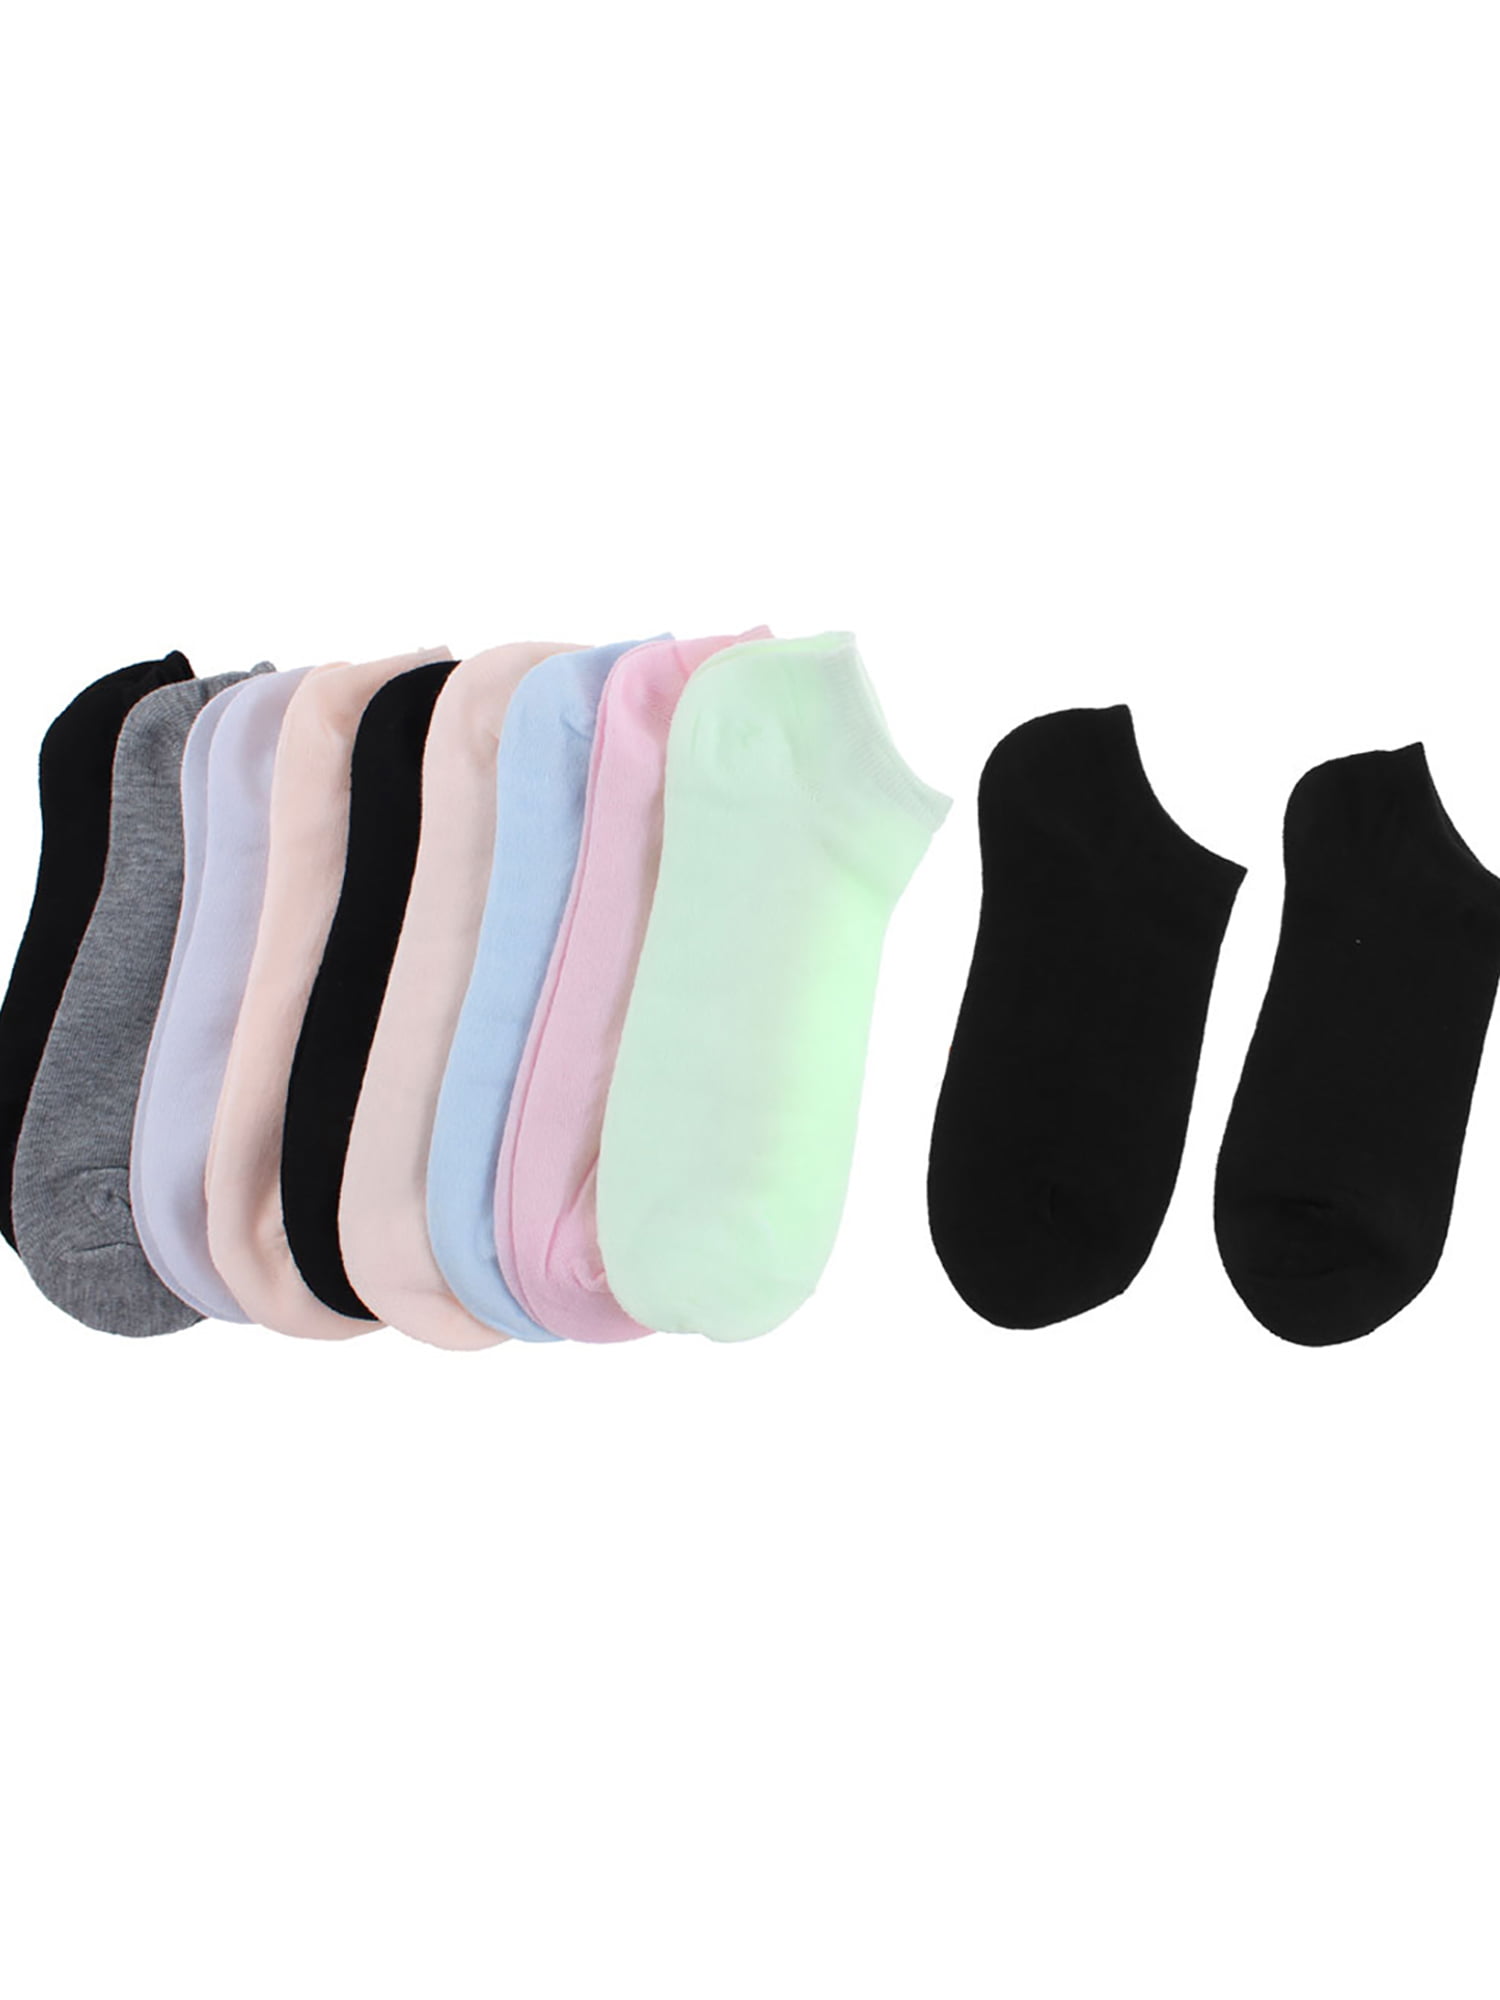 5 Pairs Women Candy Color Cute Ankle High Low Cut Cotton Socks Sports Casual New 